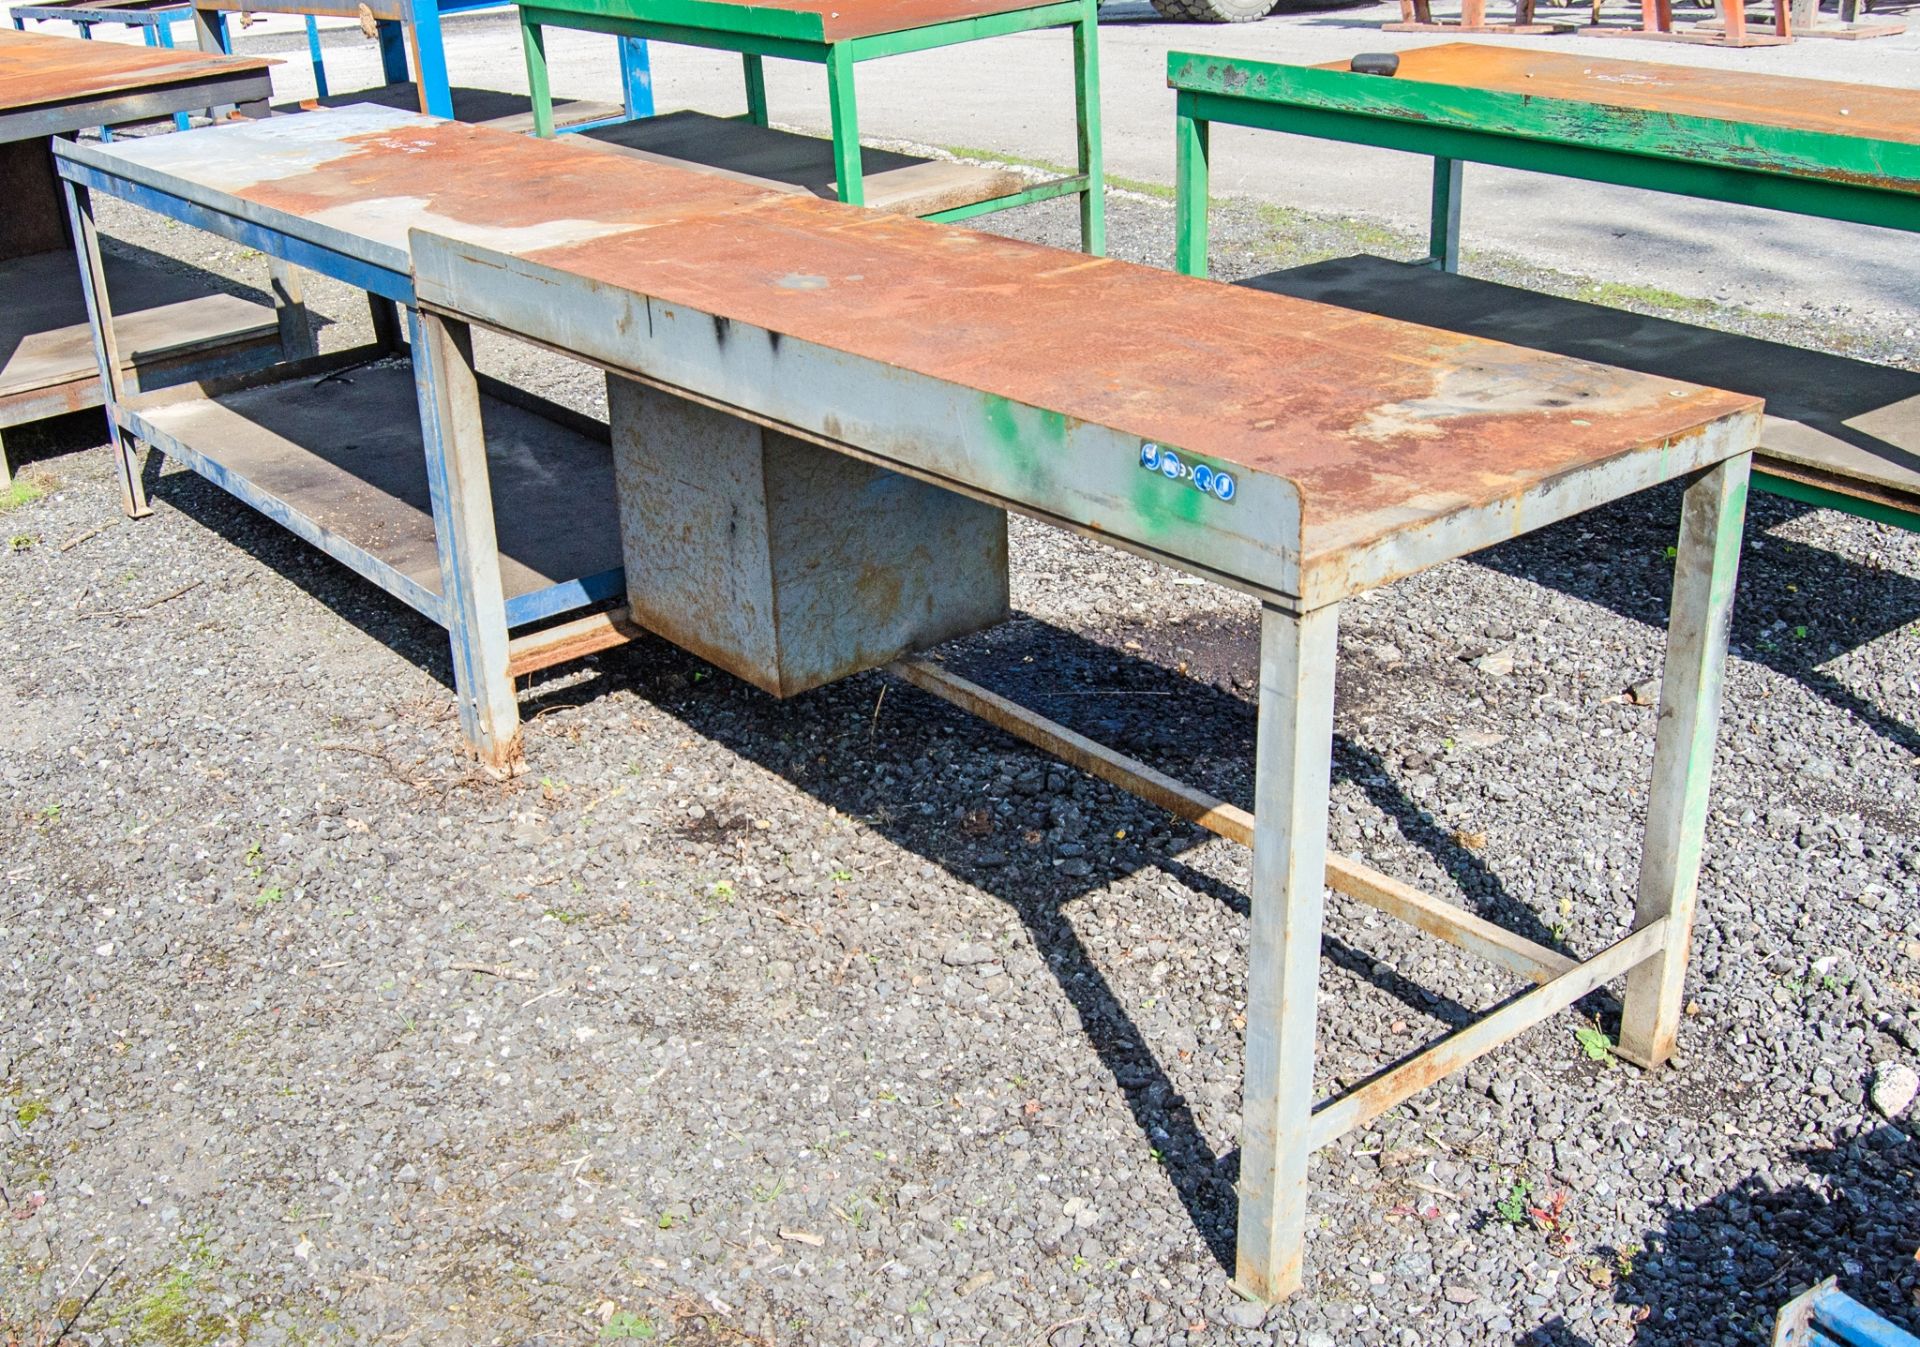 12ft x 2ft 6 inch steel work bench - Image 2 of 2